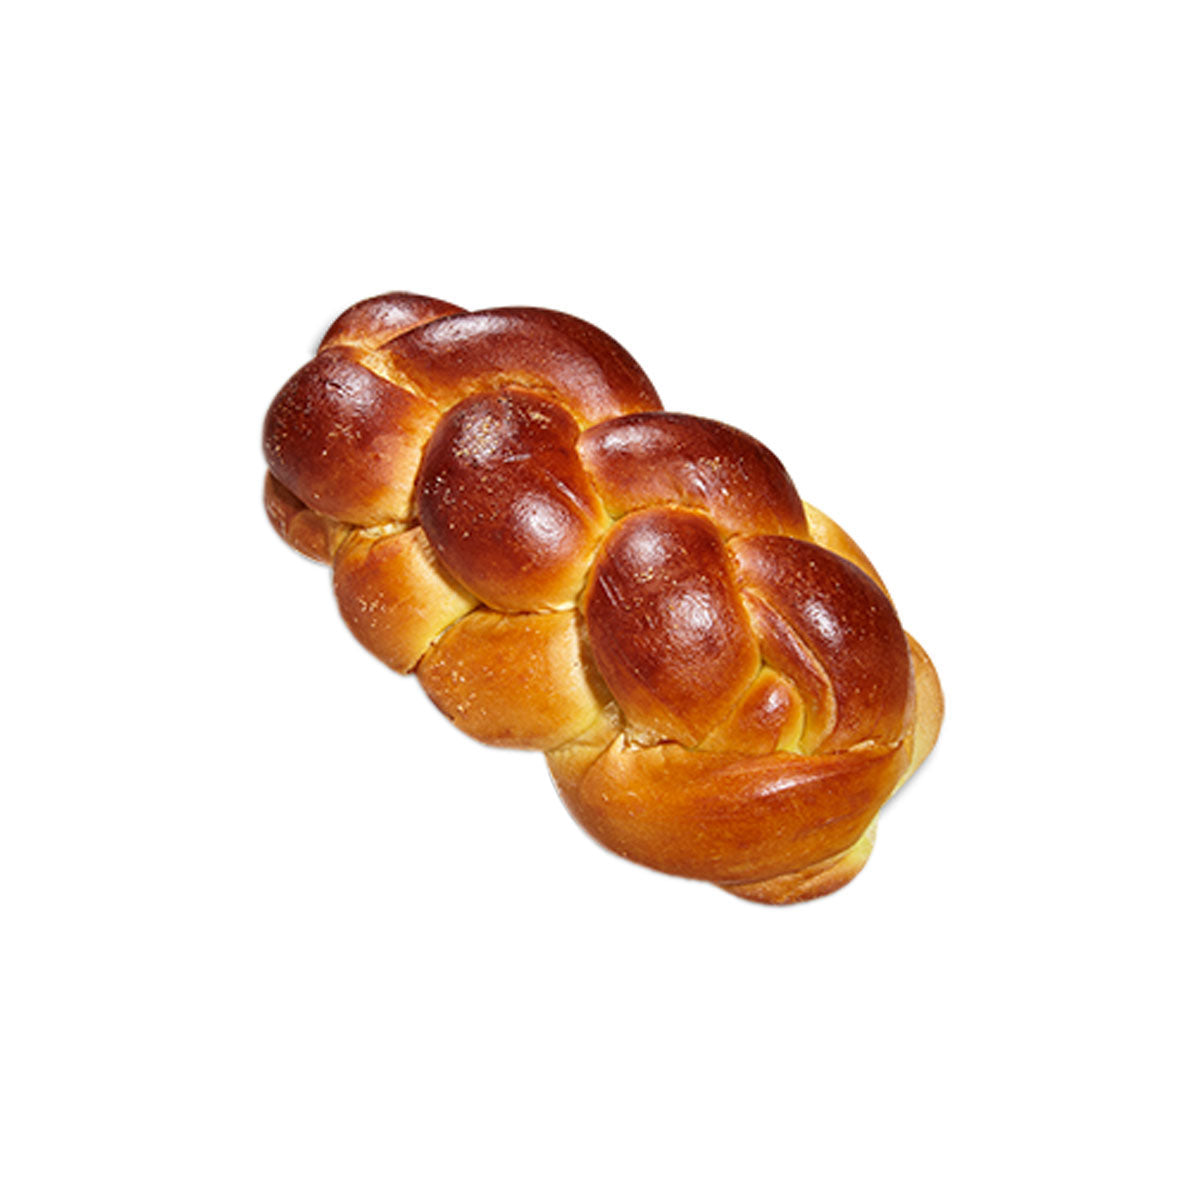 Rockland Bakery Twisted Challah Bread